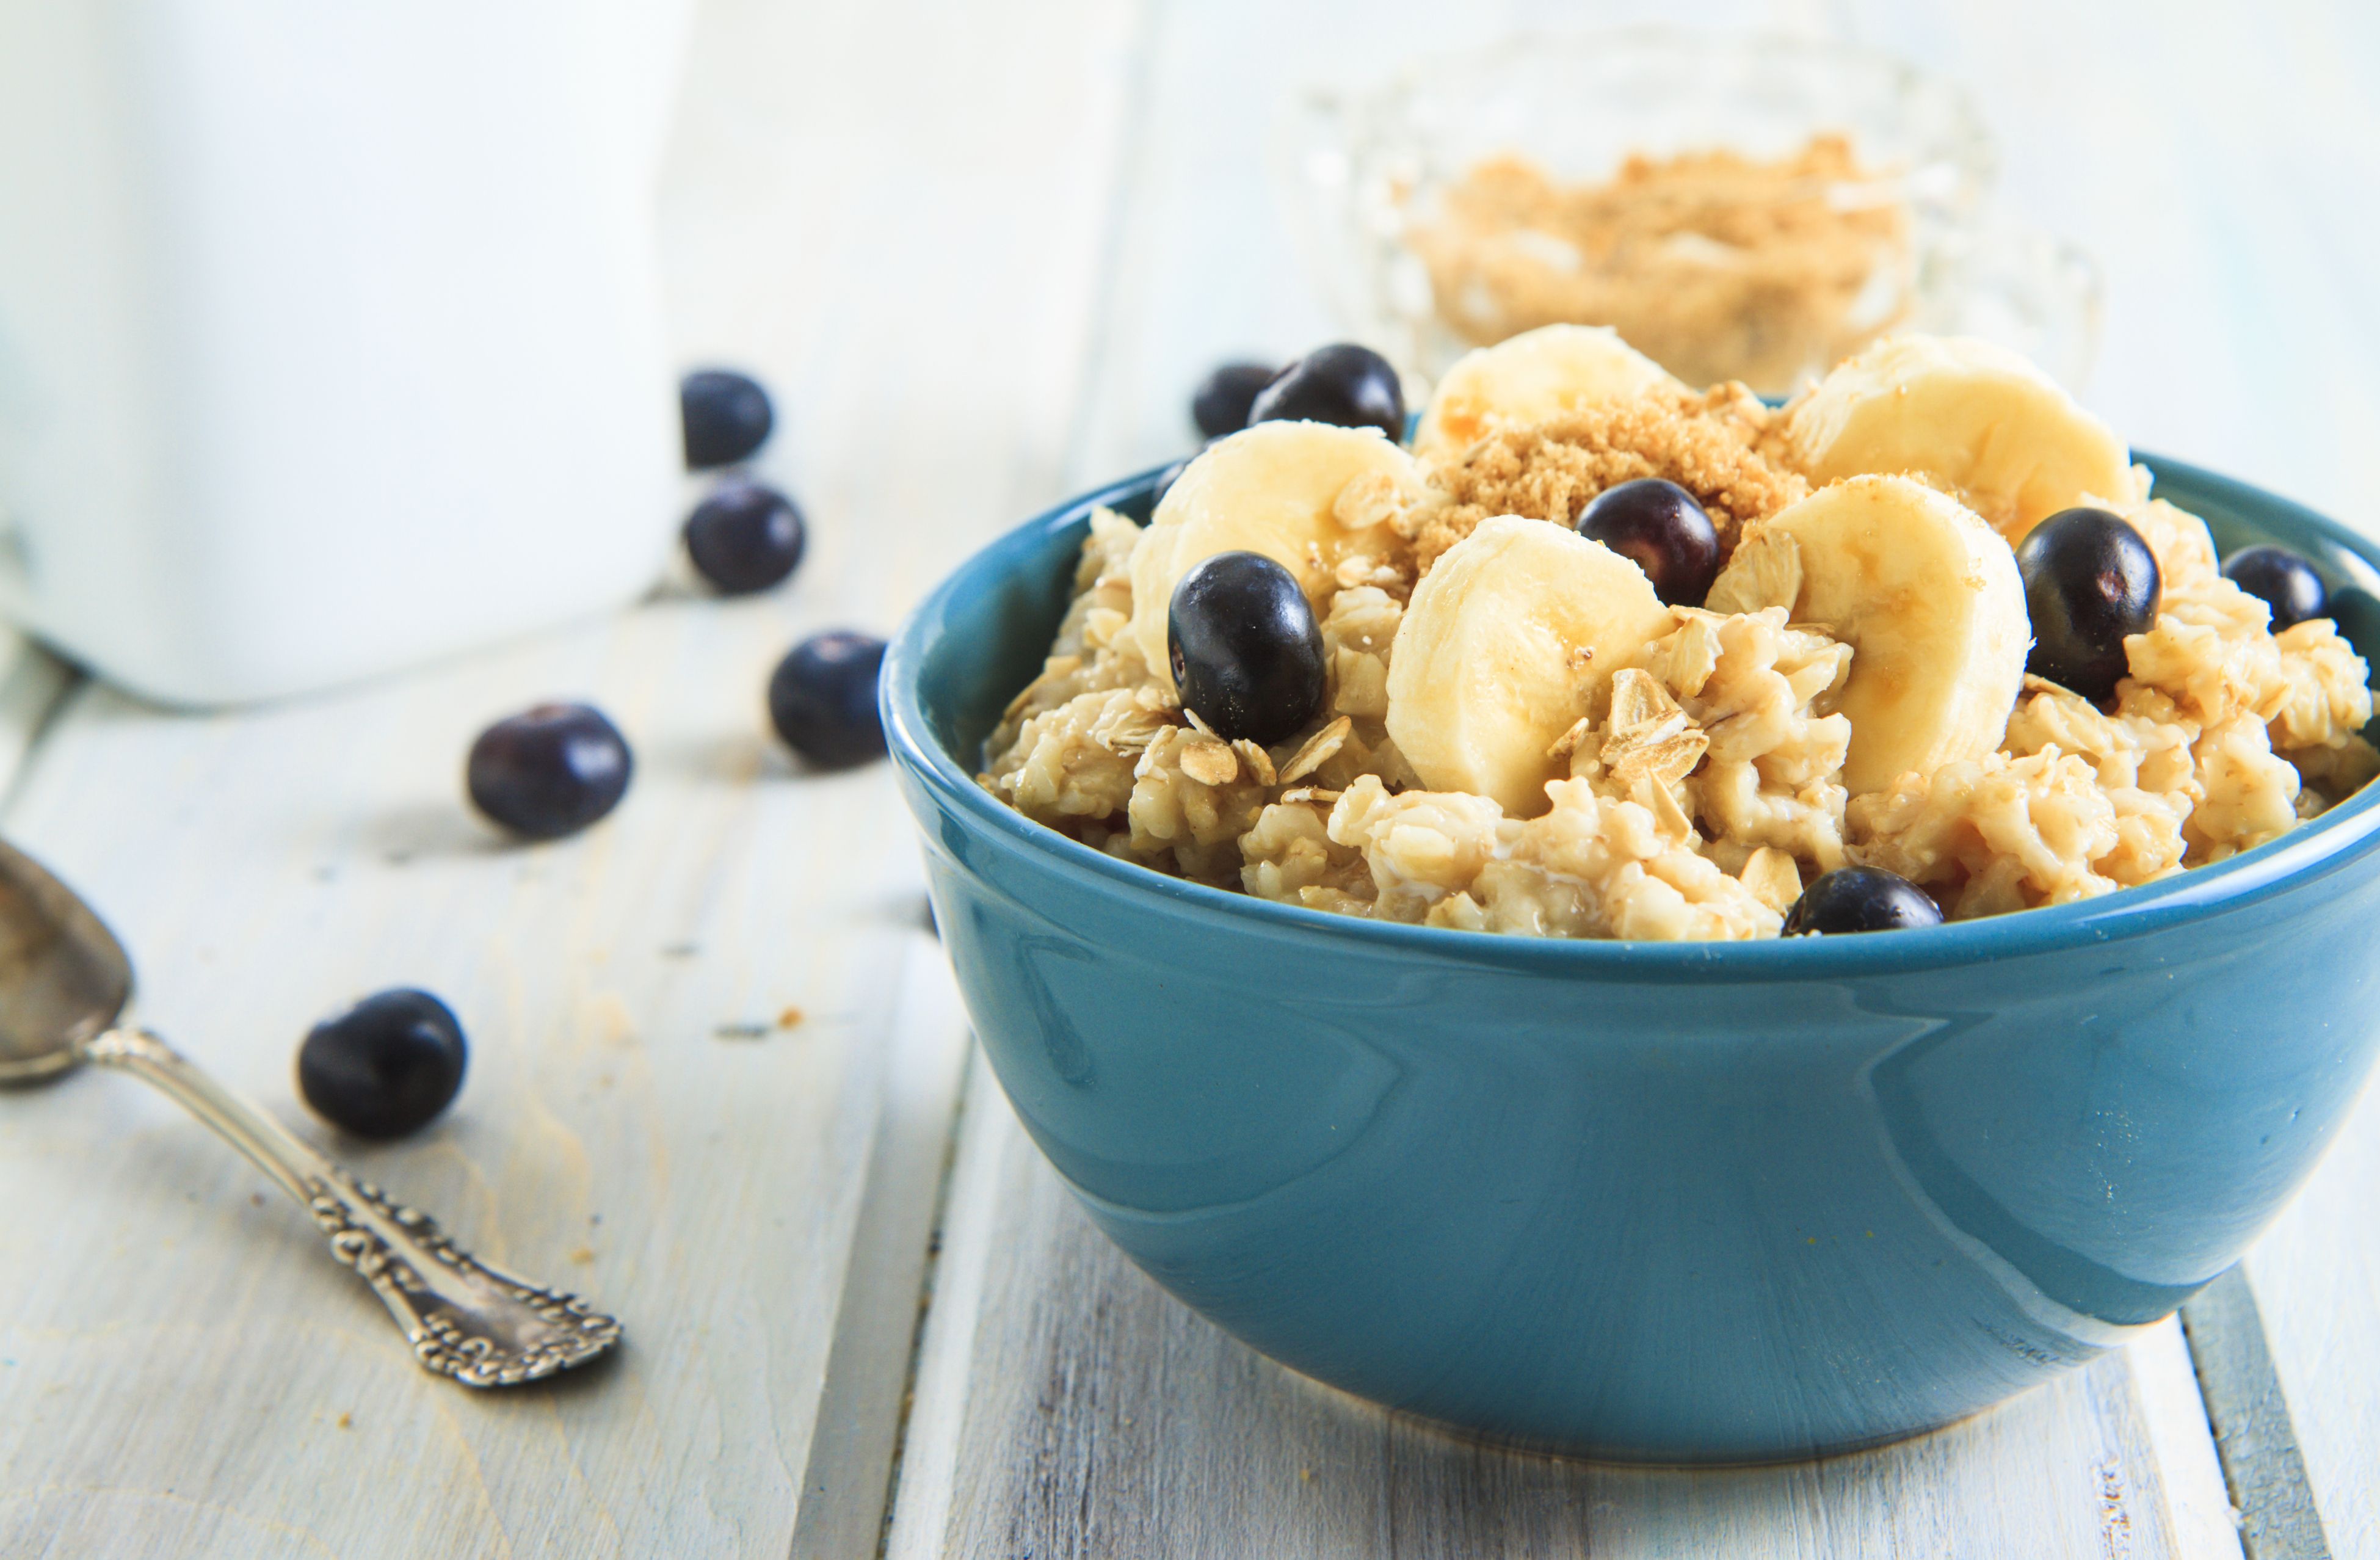 Is Oatmeal Good For You? - Health Benefits of Eating Oats